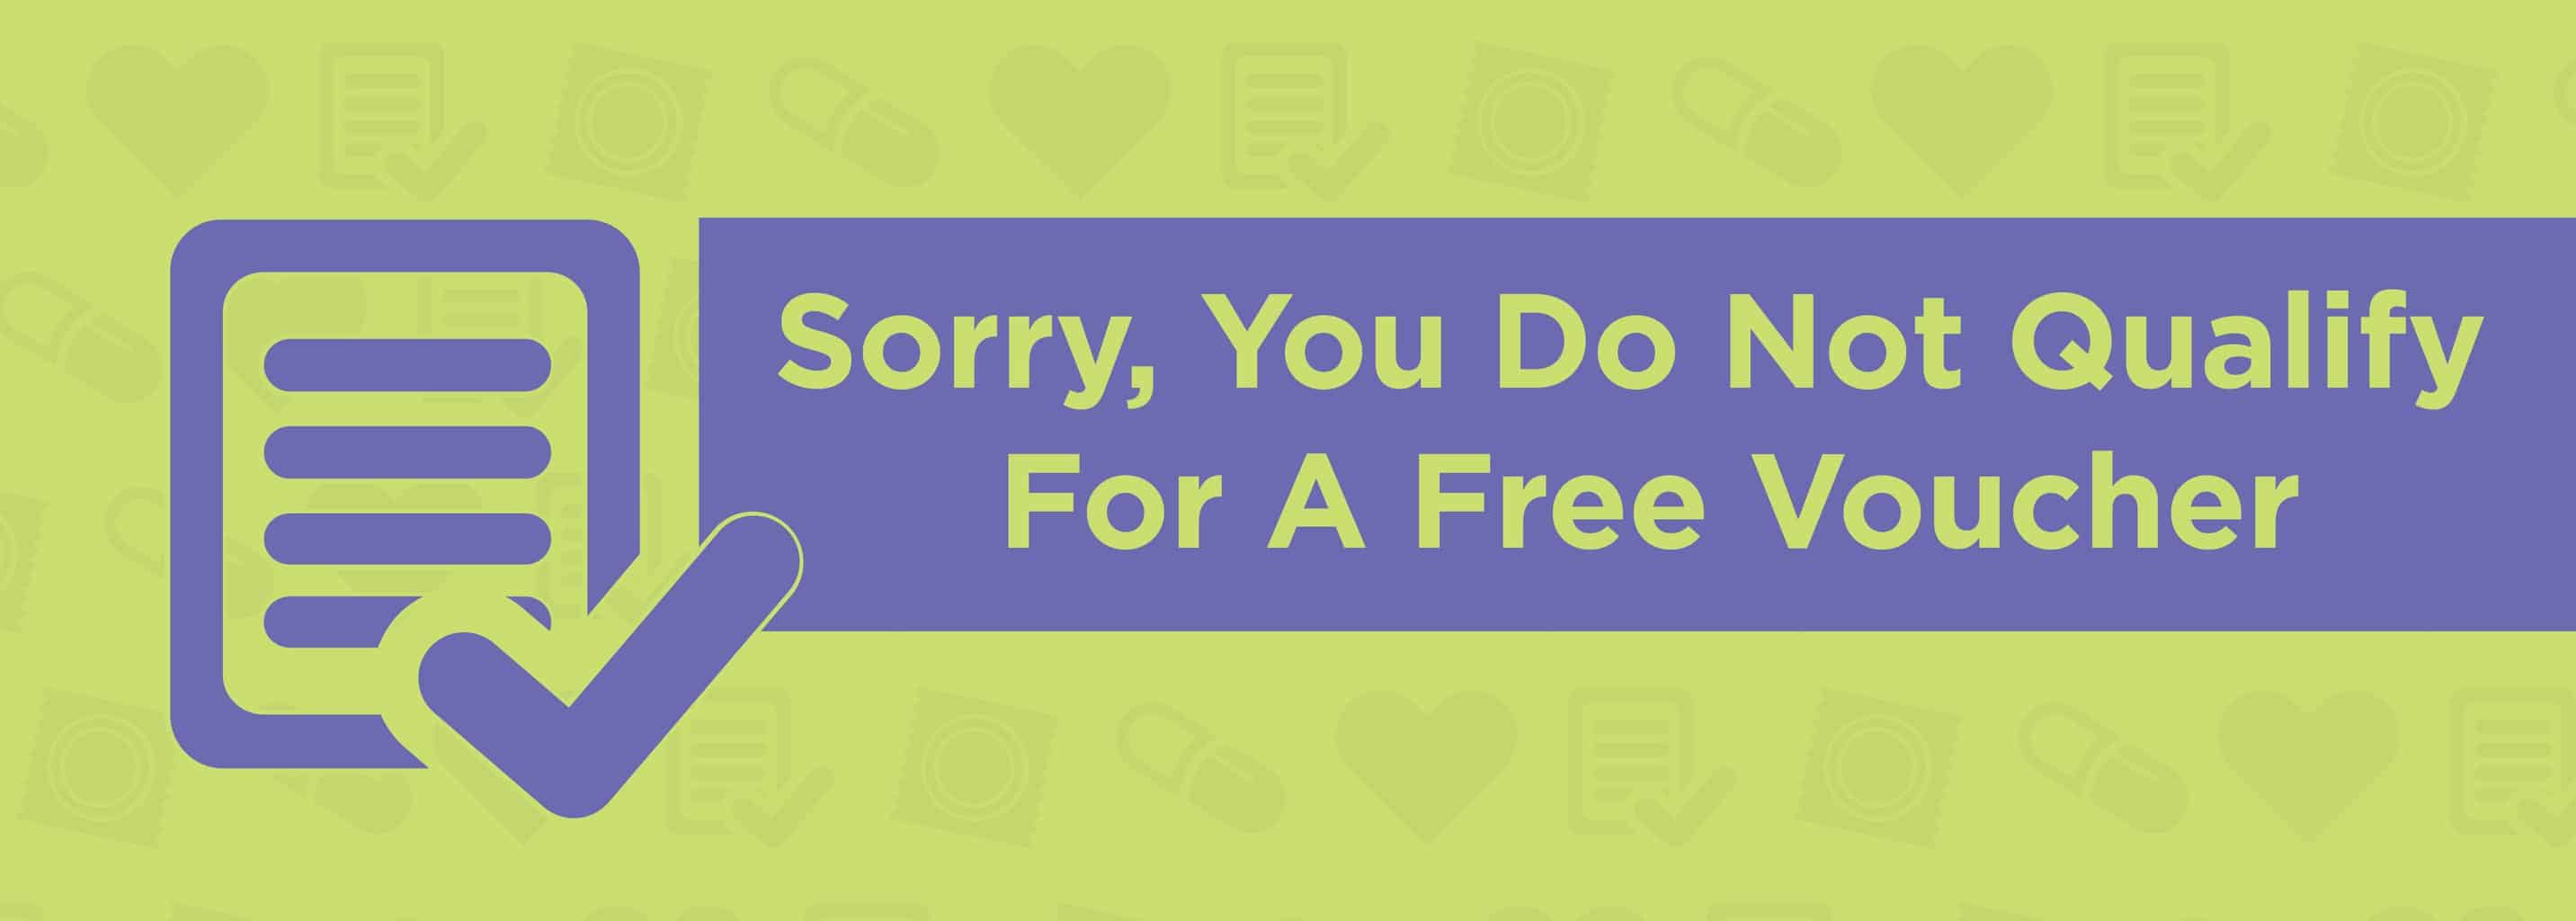 Banner that reads, "Sorry, you do not qualify for a free voucher."